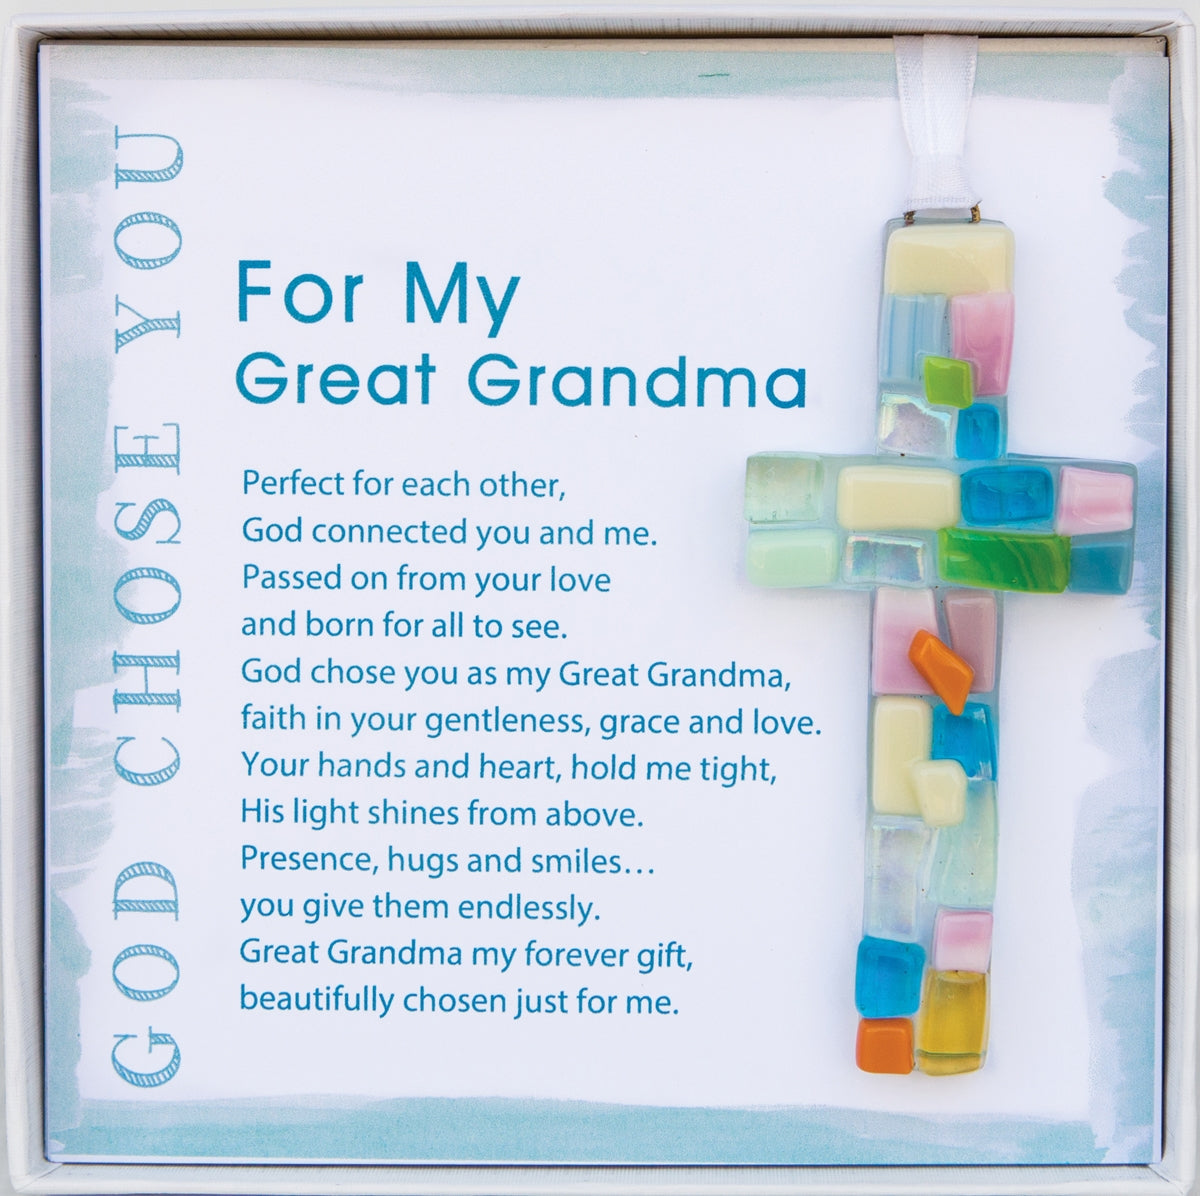 Handmade 4" pastel mosaic glass cross and "For My Great Grandma" sentiment in white box with clear lid.